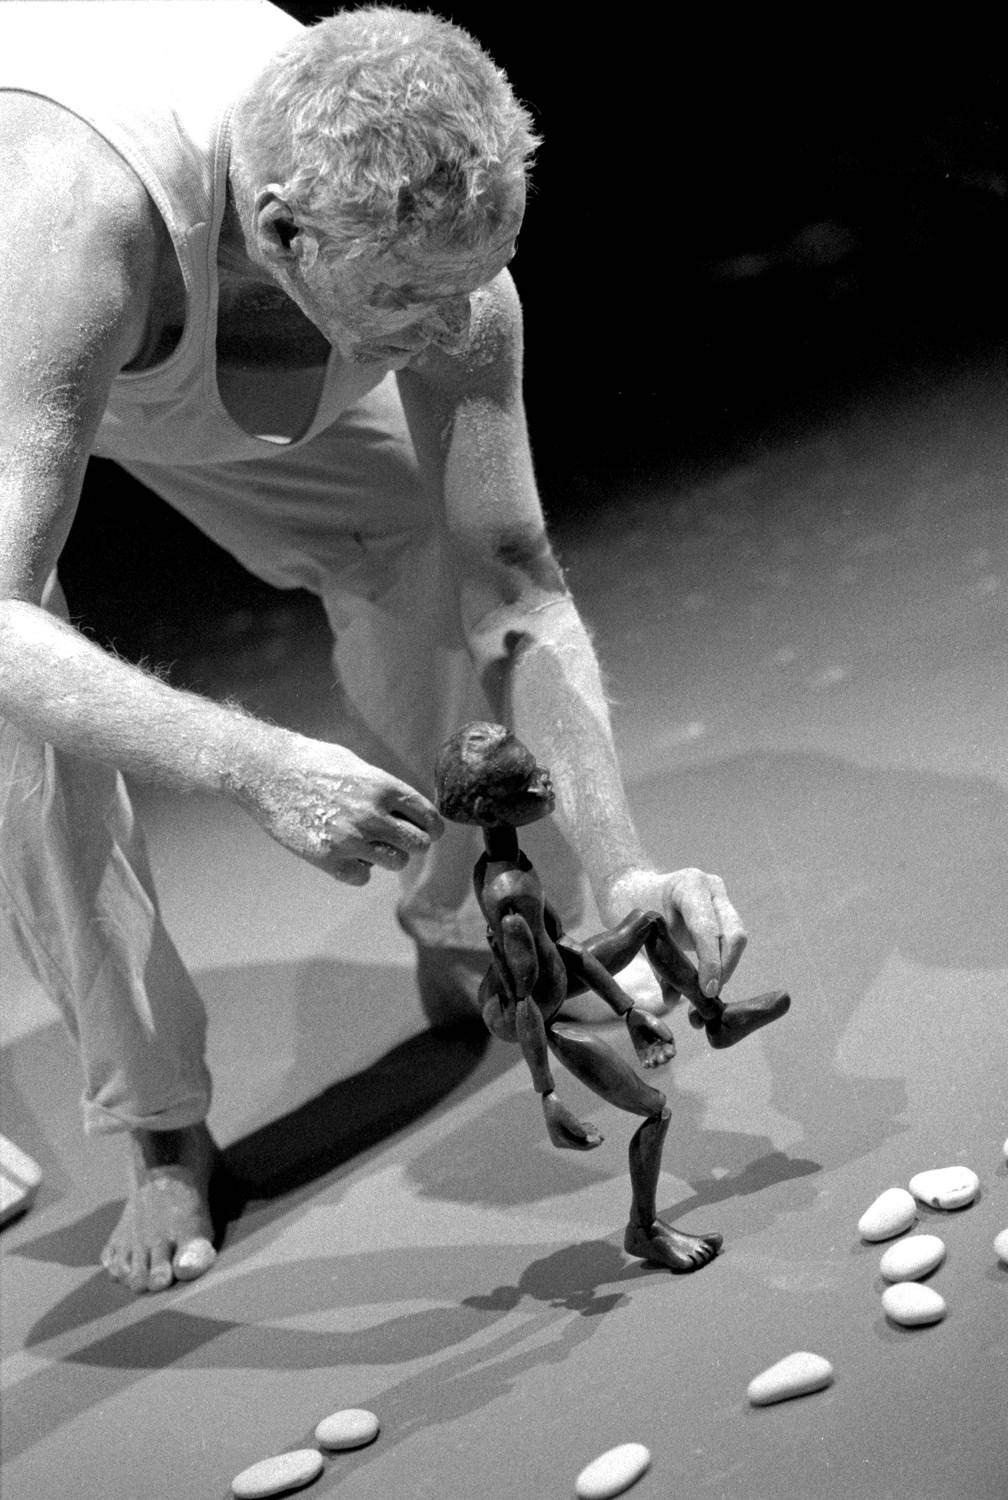 Lift 'Em Up Socks, handspan Theatre Rod Primrose, puppeteer leaning down to operate Aboriginal boy rod puppet within a stone pattern on the floor